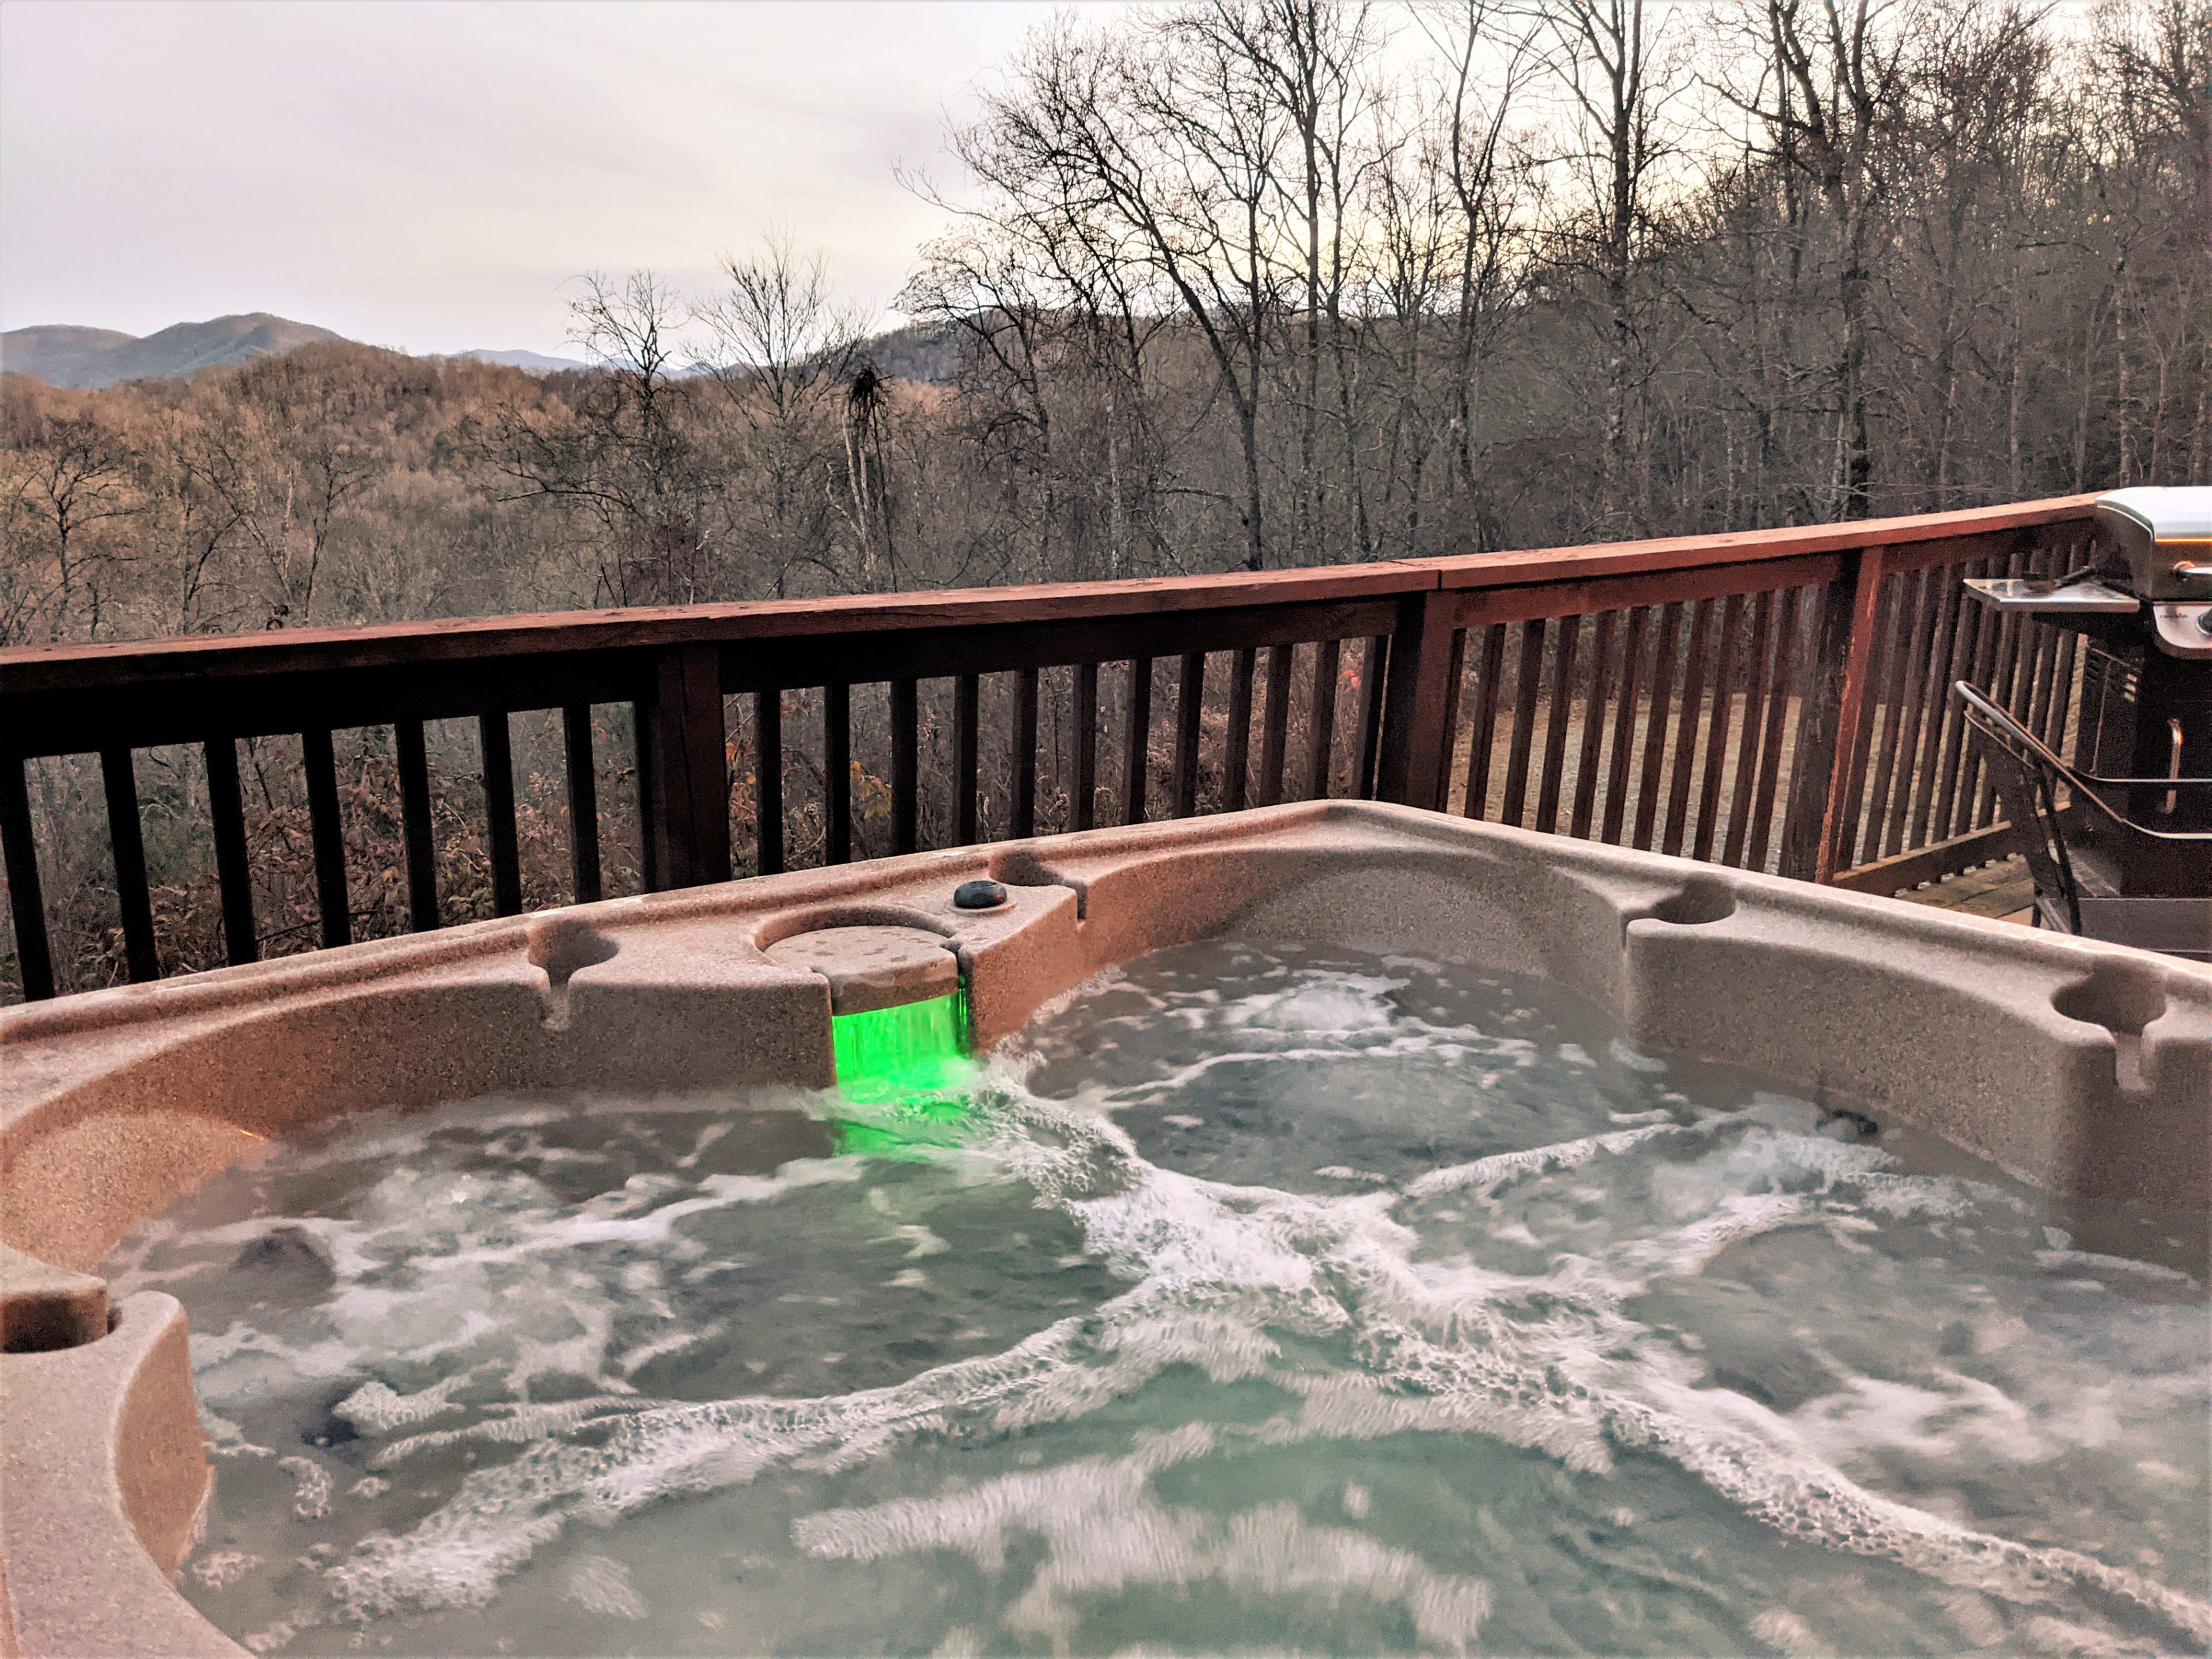 The LED in the Hot Tub adds a little ambiance - though you'll probably be lost in the view of the stars and the setting sun.